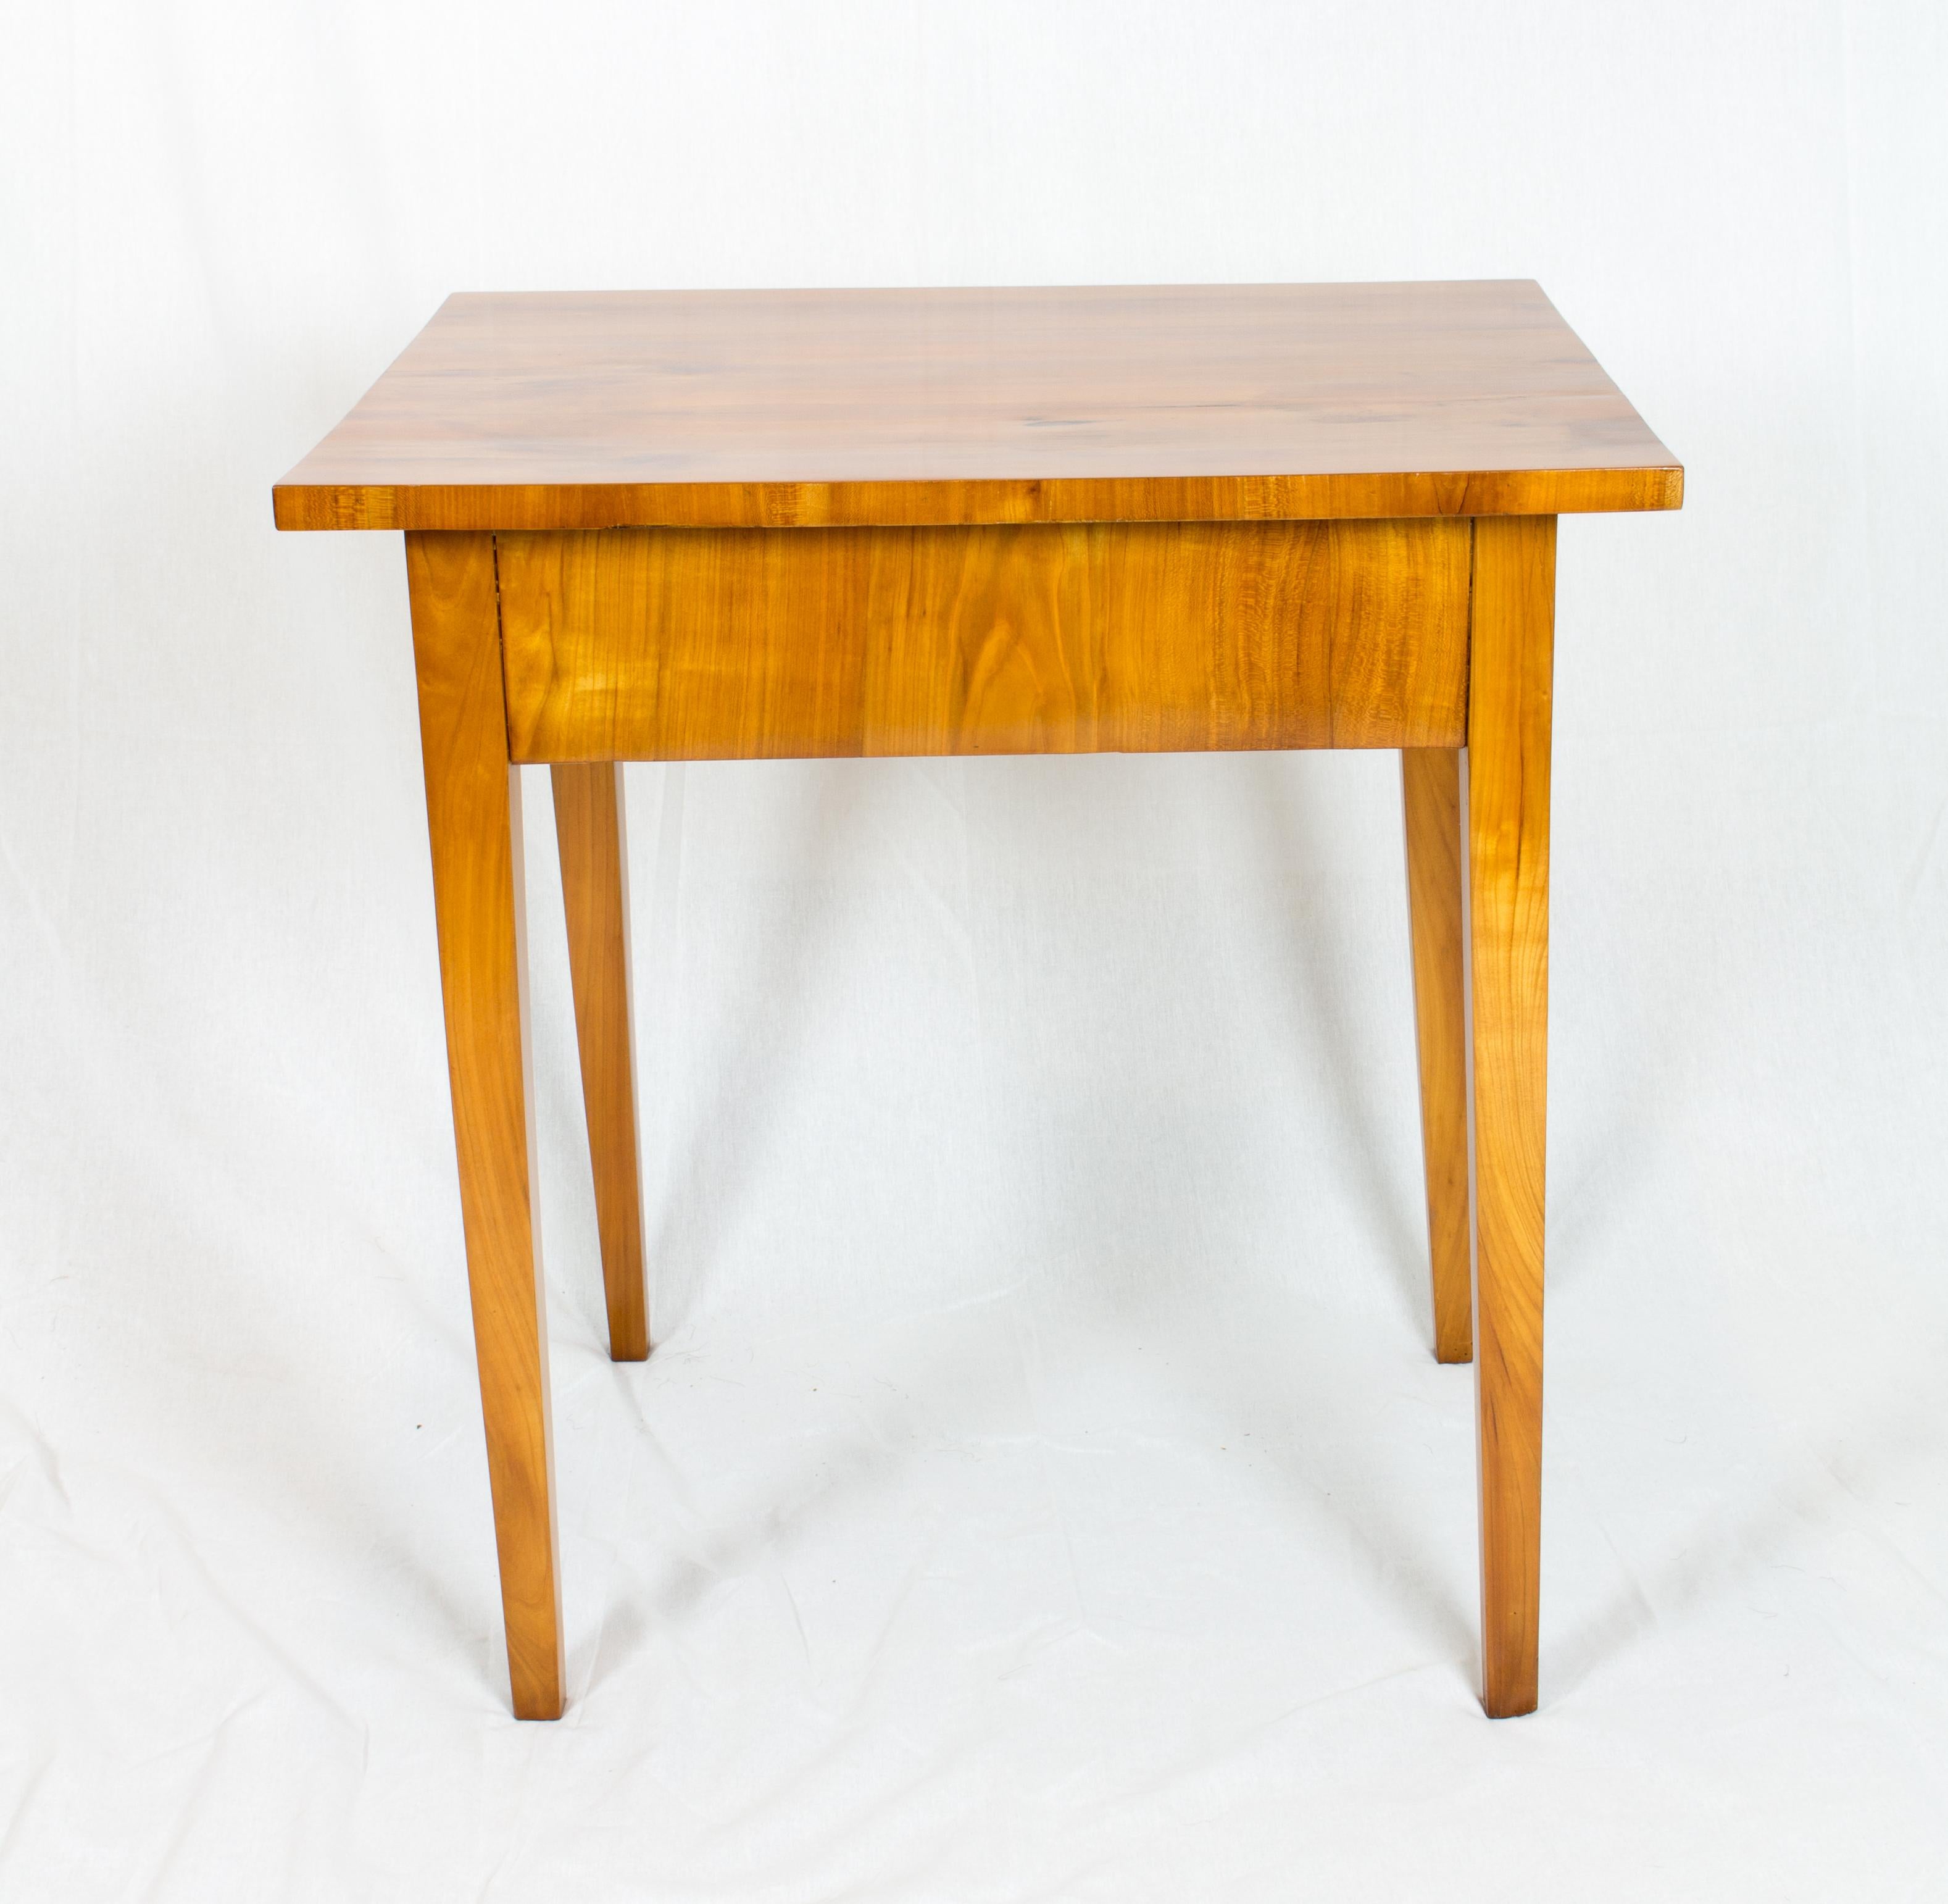 The side table is made of cherrywood veneer on a pinewood body, the table legs are solid cherrywood. A wonderful timeless design, dates back to the time of Biedermeier, circa 1820. The drawer is, as usual, made of pine wood, the panel of cherry. In